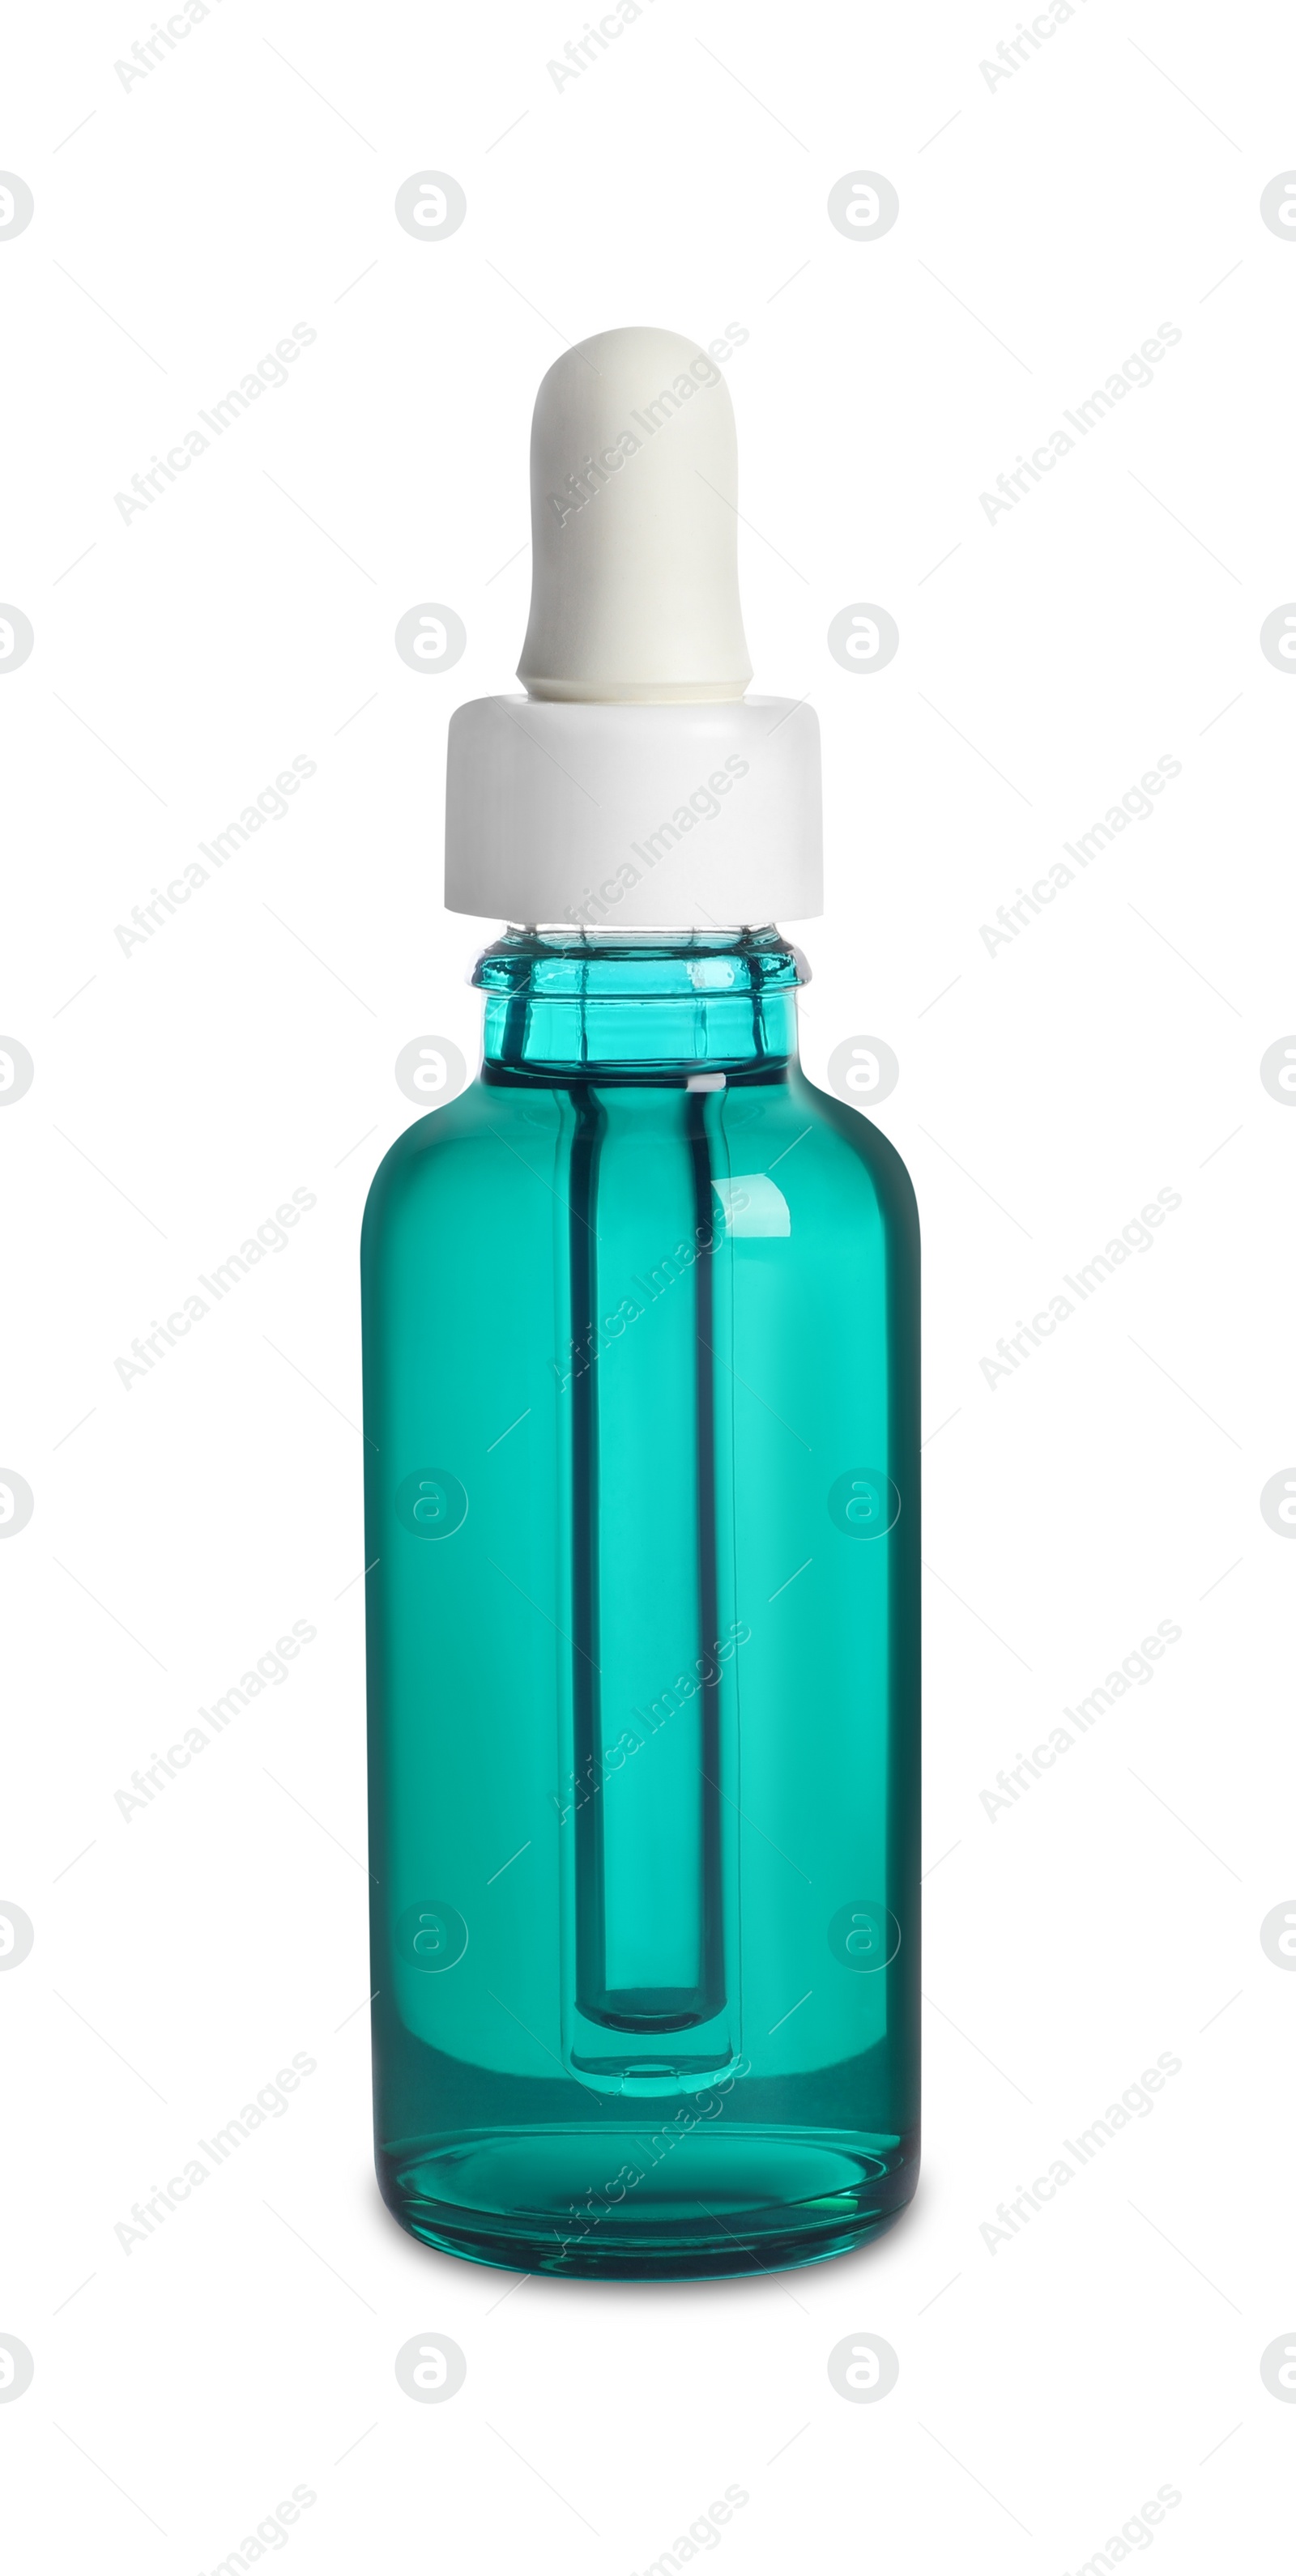 Photo of Bottle of cosmetic serum isolated on white